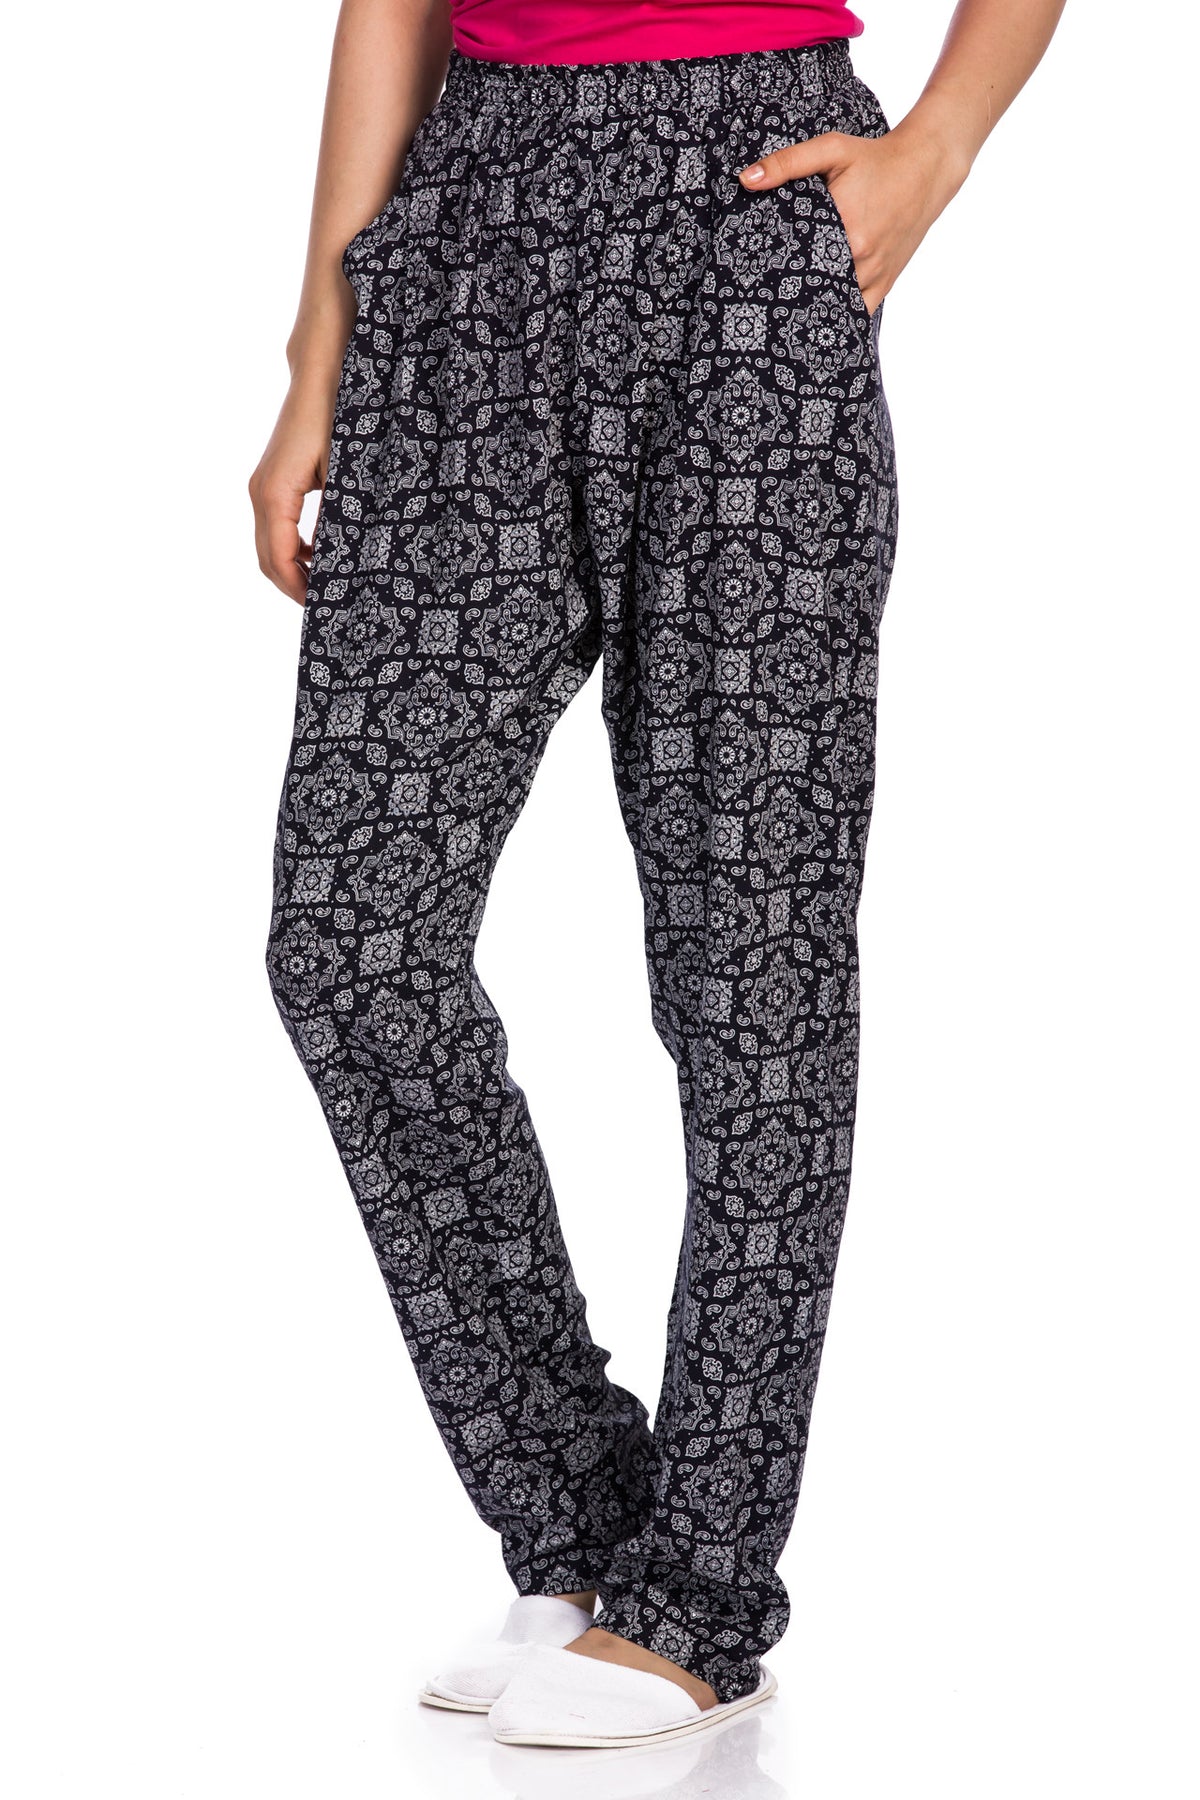 Abstract Navy & White Cuff Pants